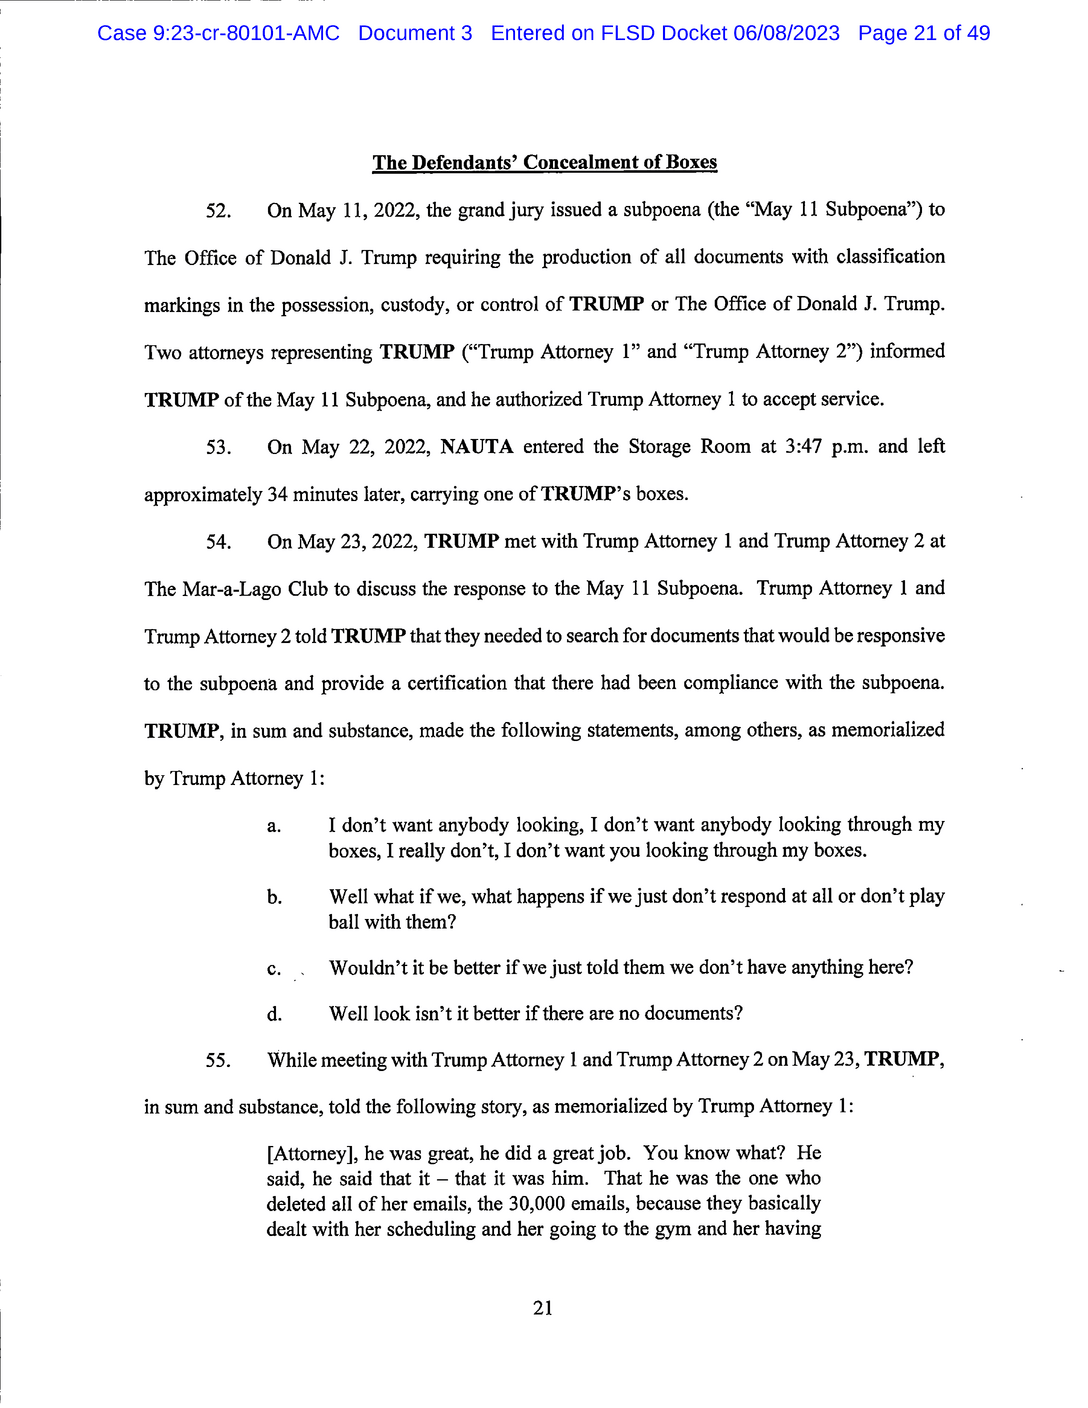 Page 21 of Donald Trump Classified Documents Indictment PDF document.